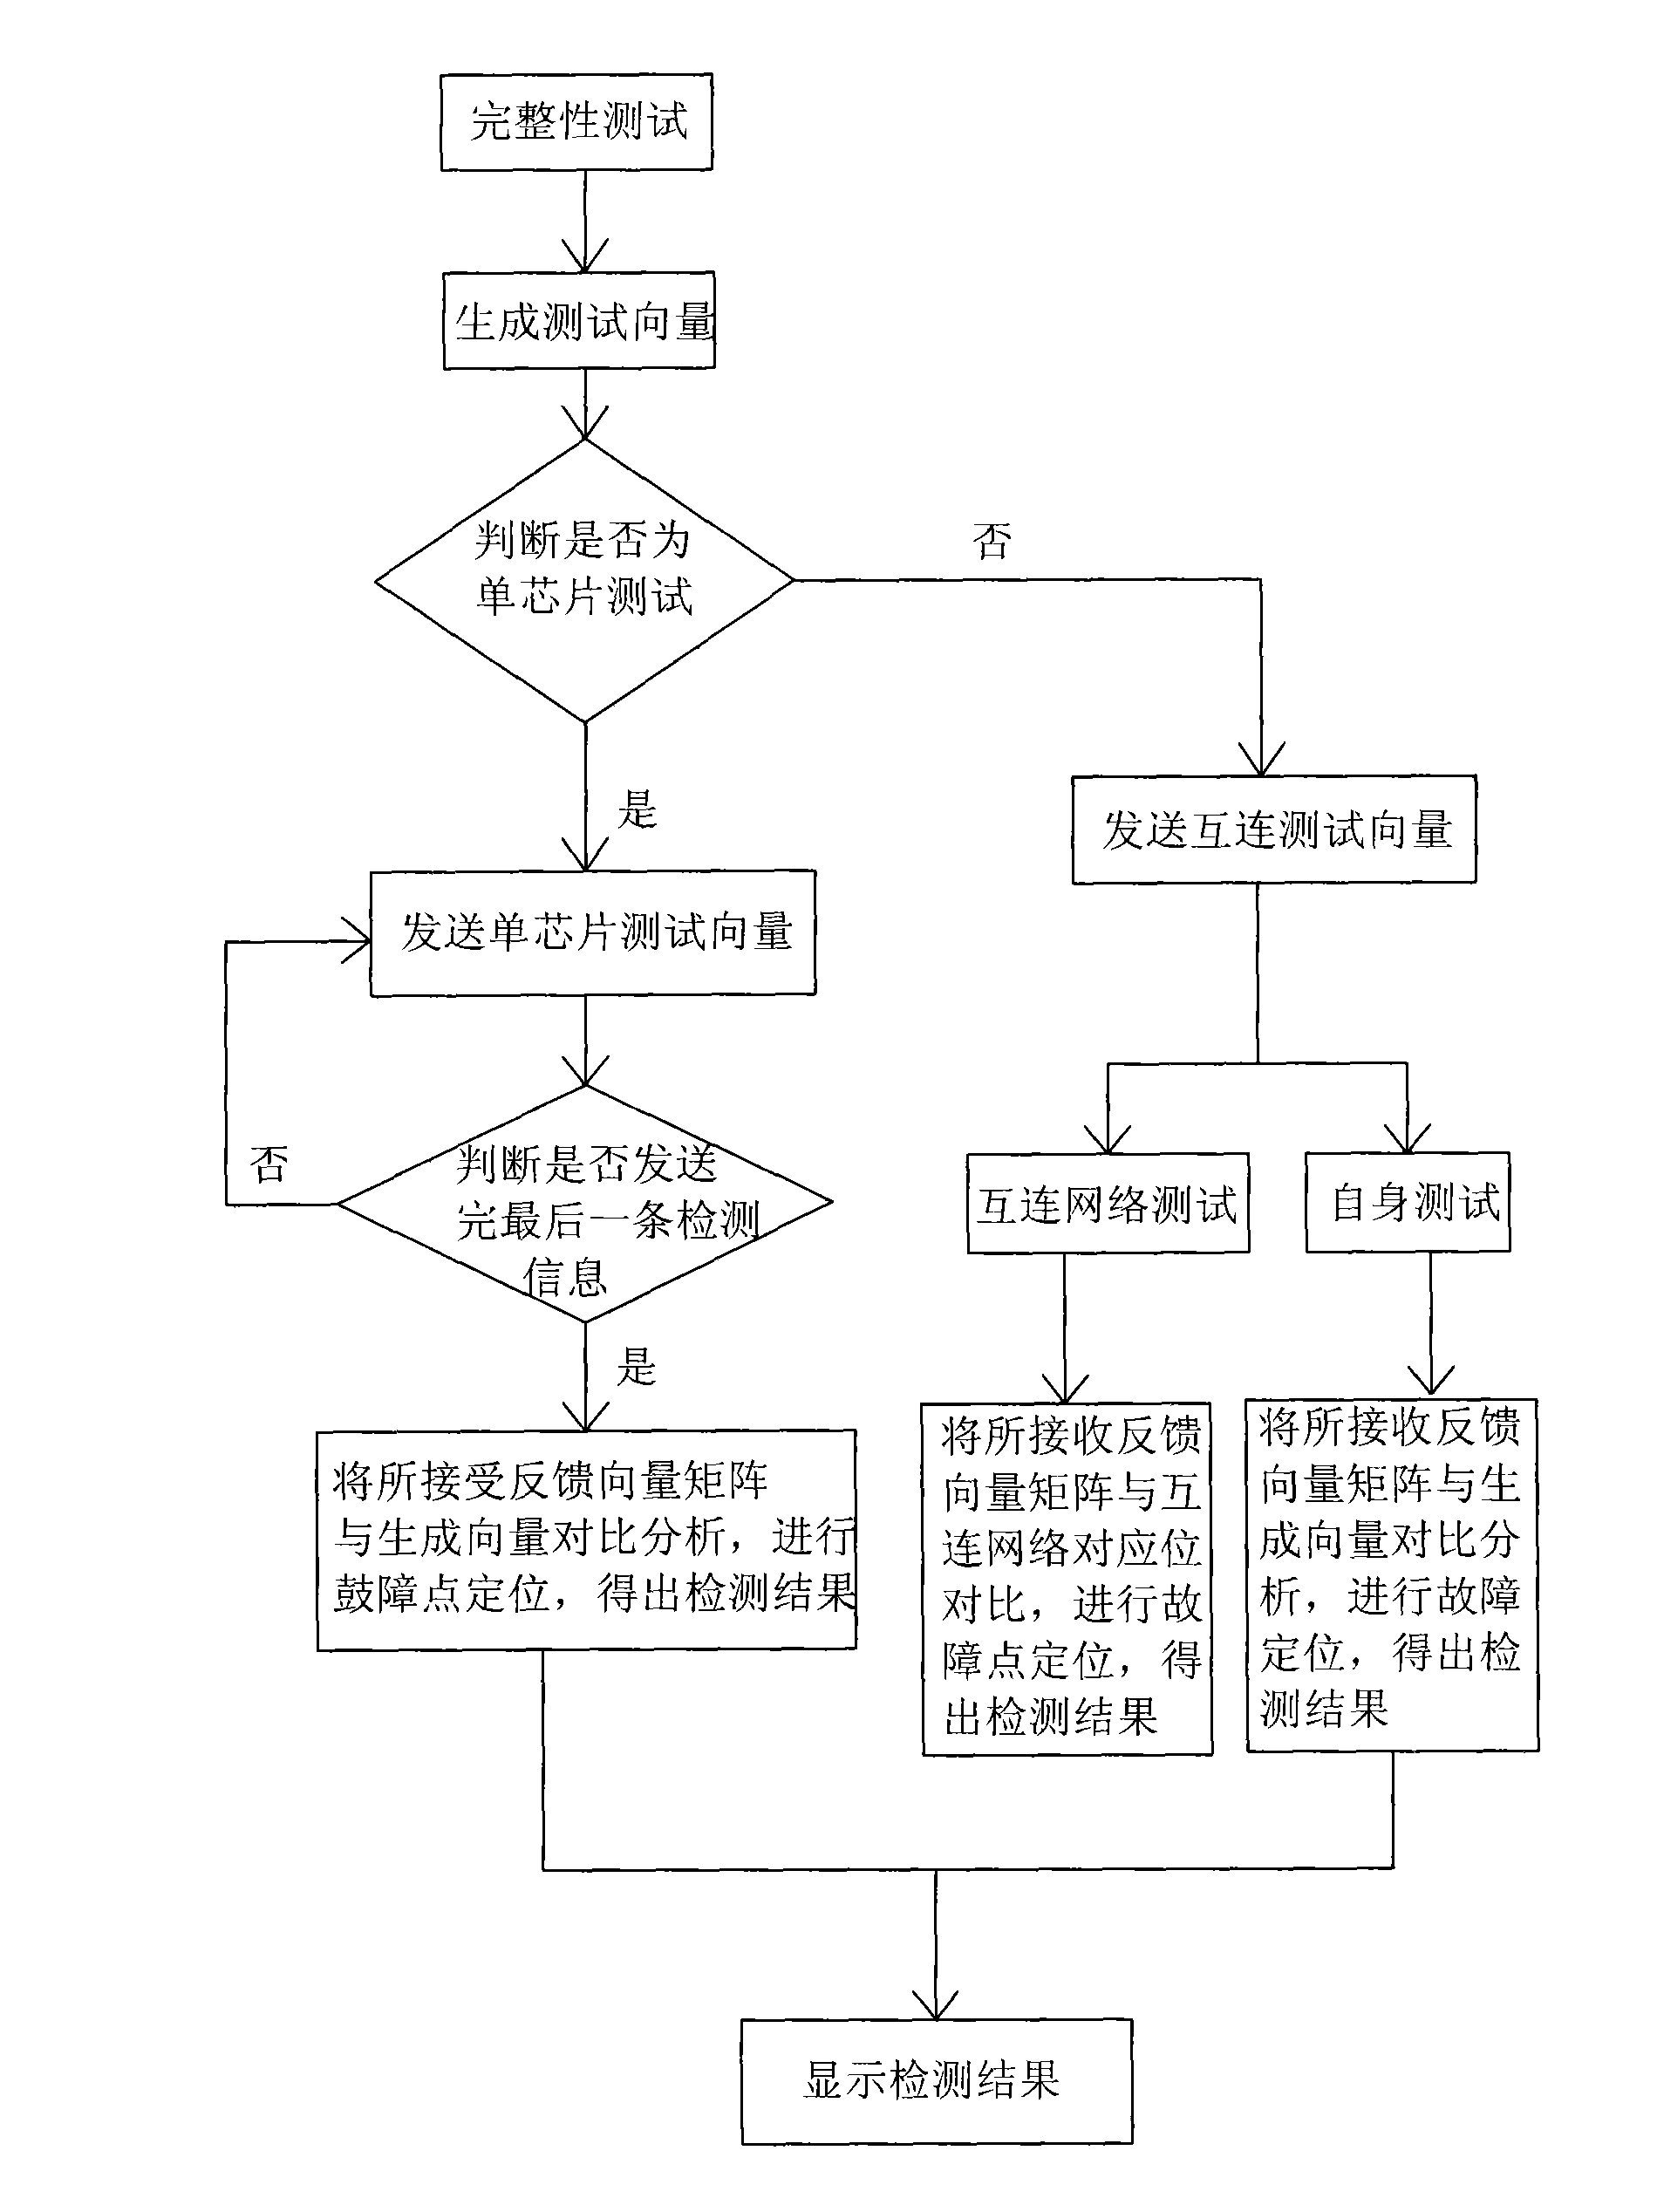 Boundary scanning chip failure detection device and method